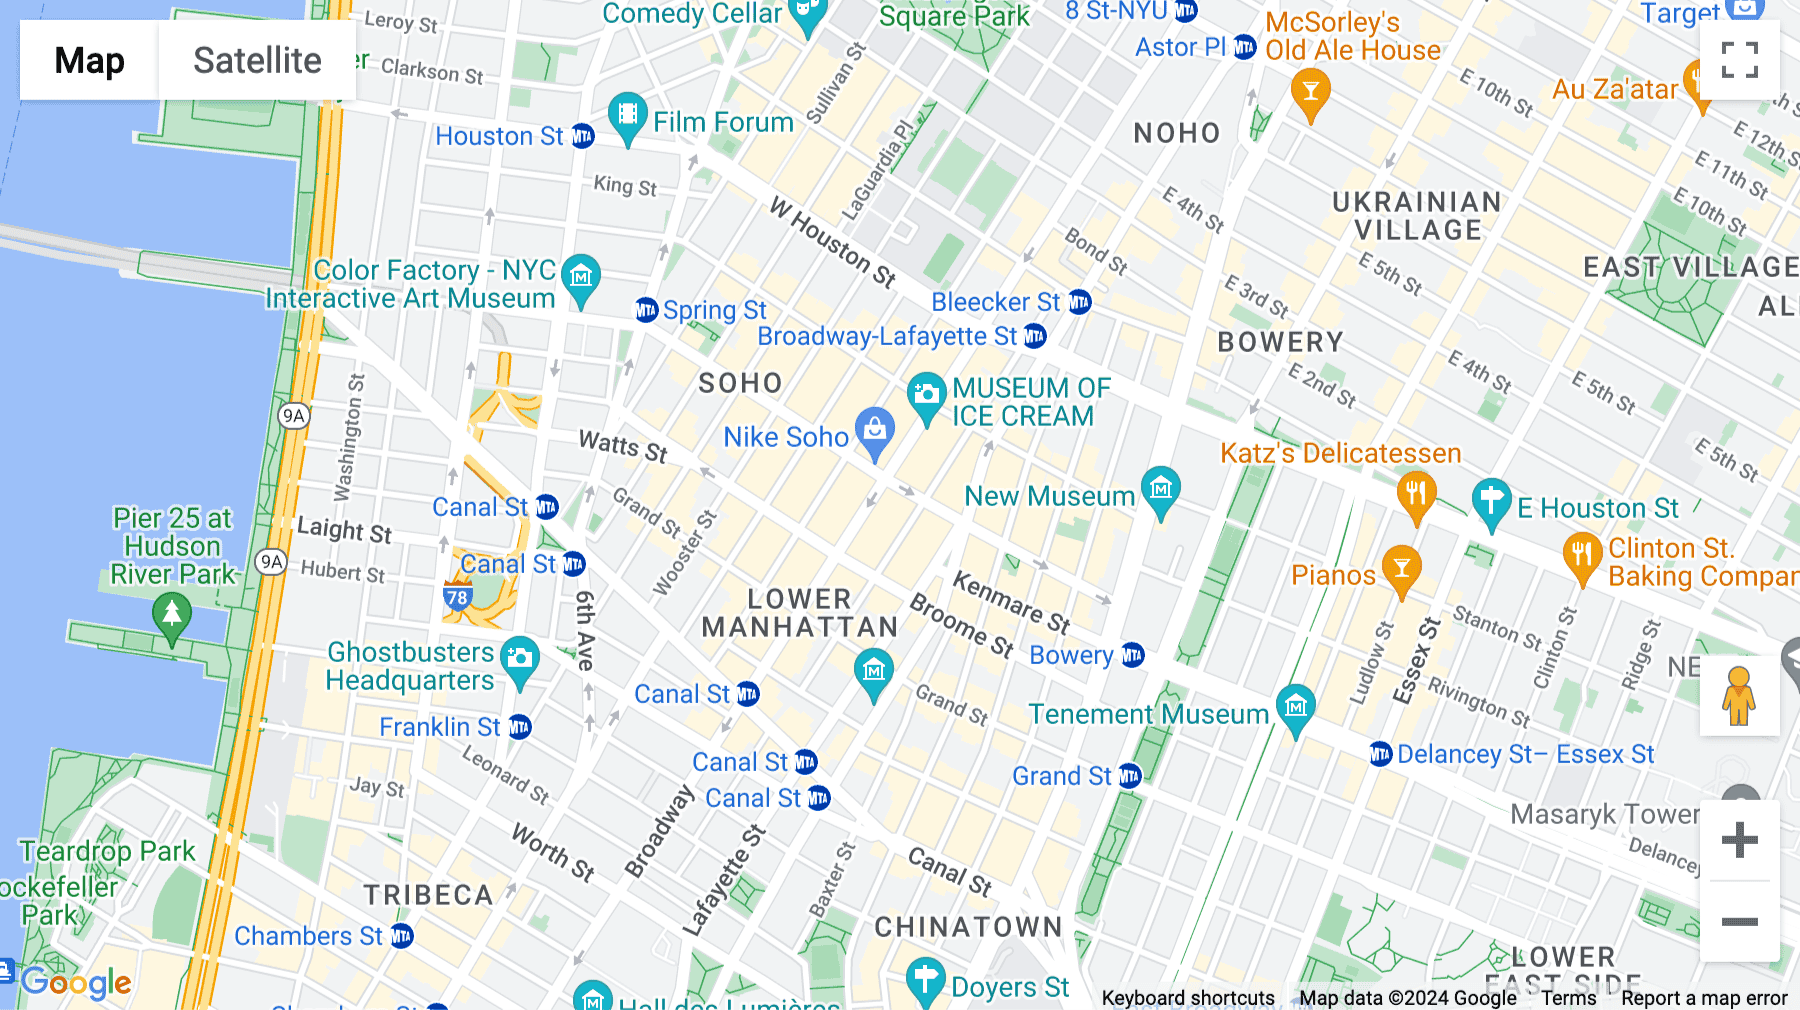 Click for interative map of 524 Broadway, 7th Floor, WeWork 524 Broadway, New York